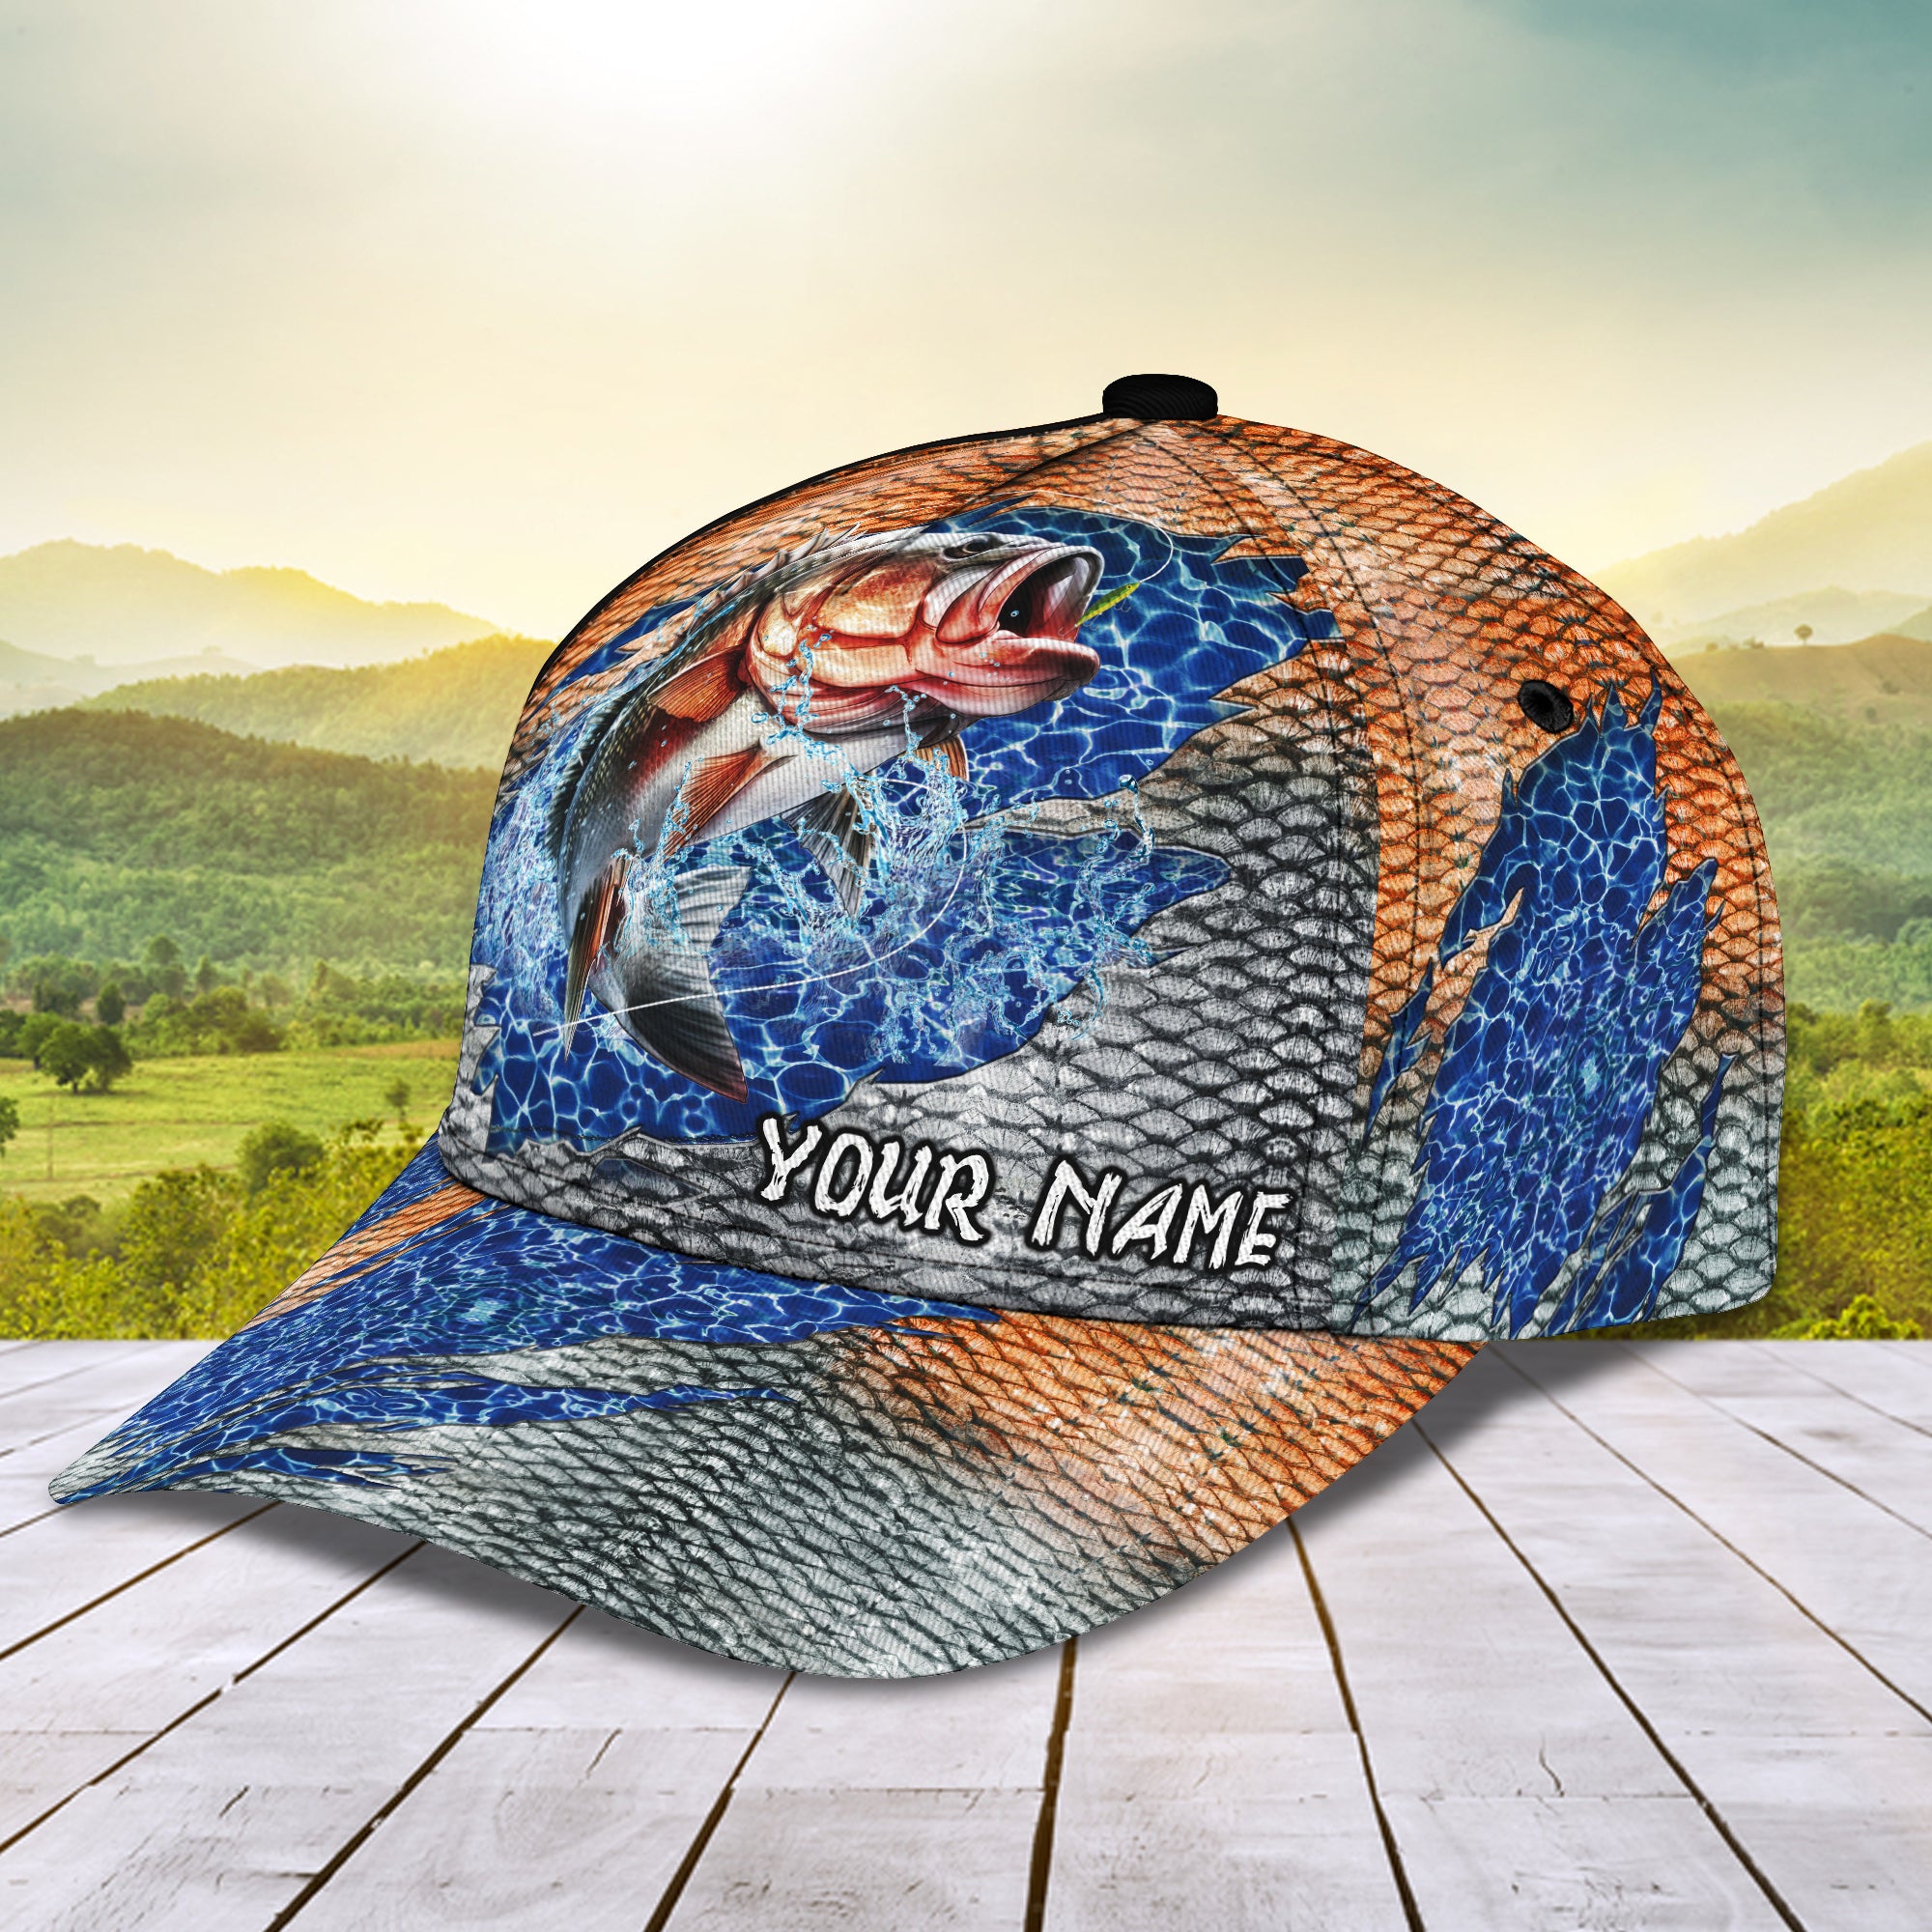 Fishing 02 - Personalized Name Cap - Pth98